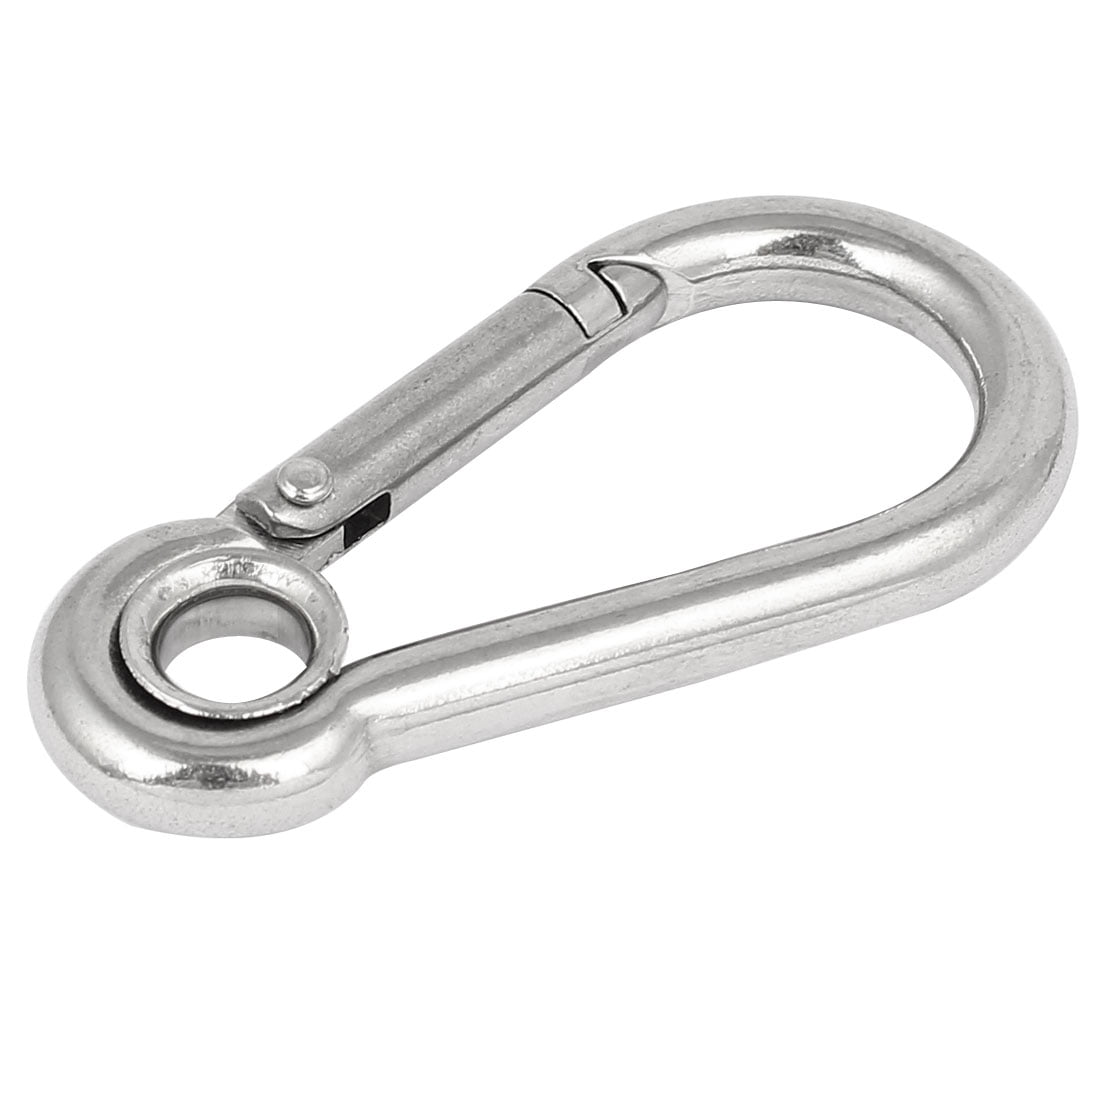 A540 Stainless Steel Interlocking Snap Carabiner  275 KGS Load Rated-Free Post 